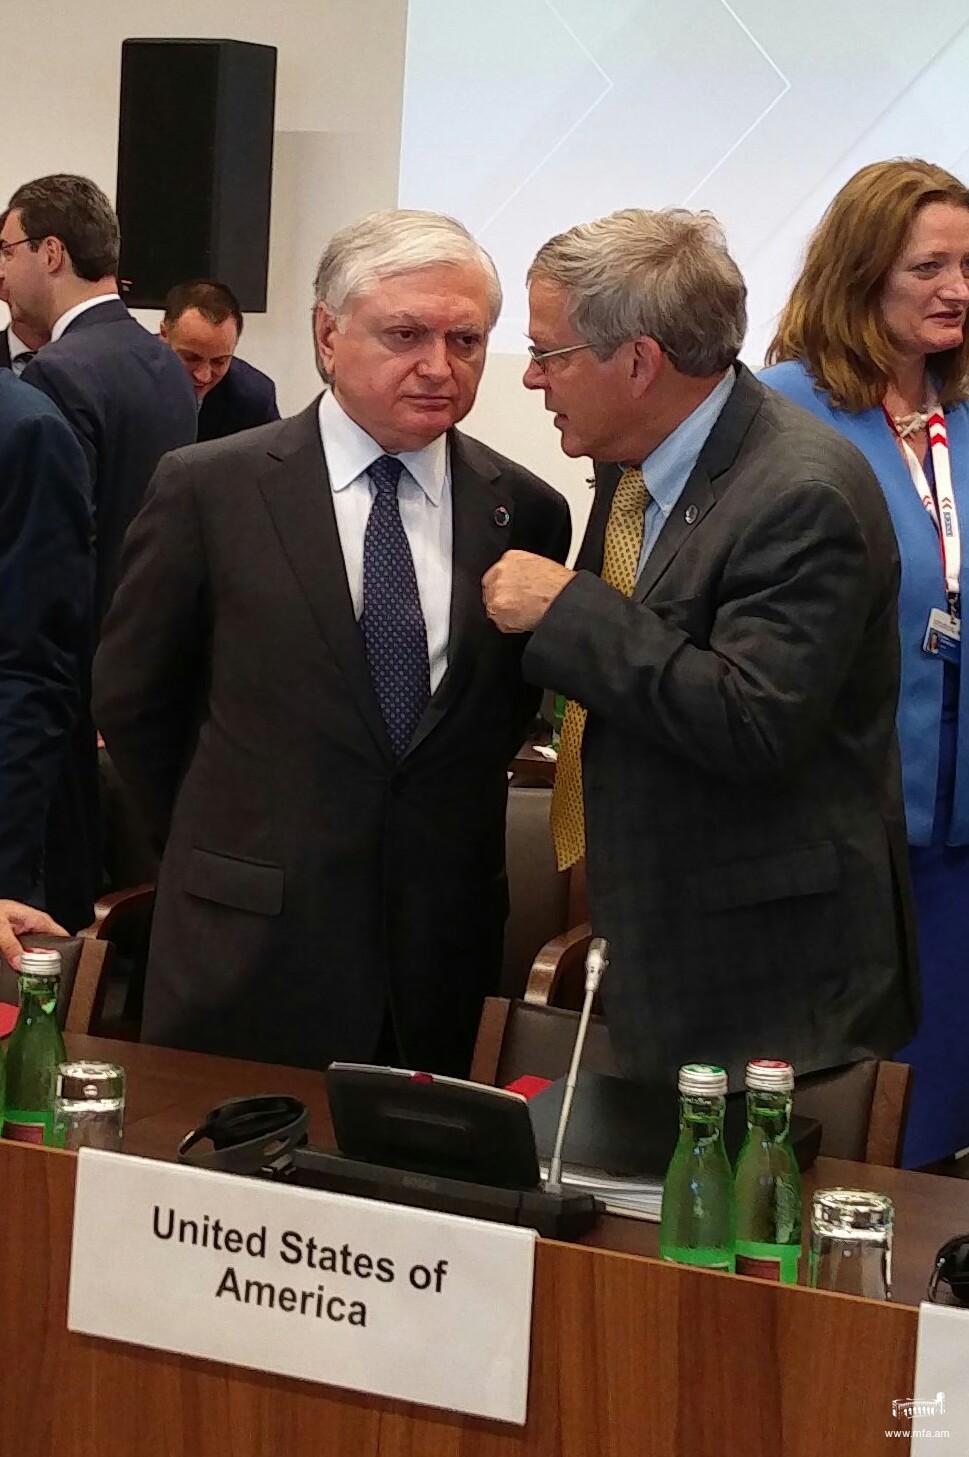 Edward Nalbandian: As long as Azerbaijan fails to respect its international commitments Baku bears full responsibility for all consequences